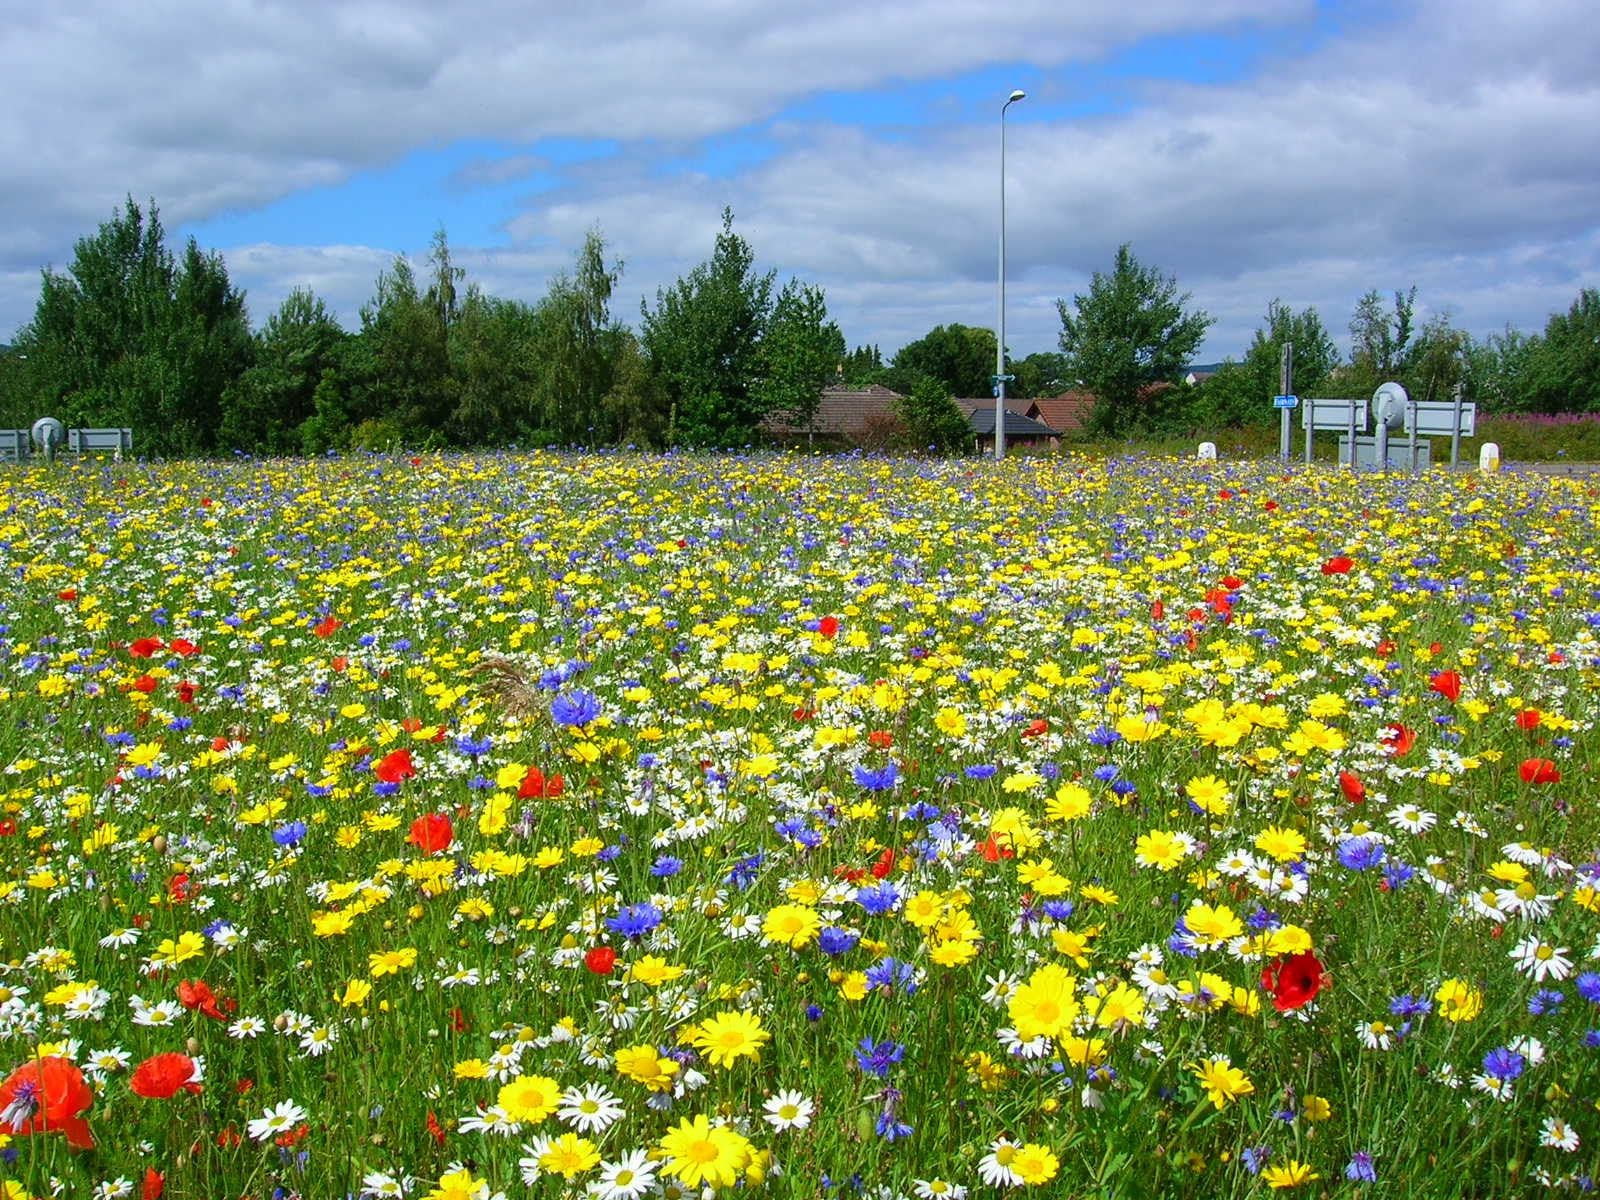 A colourful wildflower meadow created by a Highland road